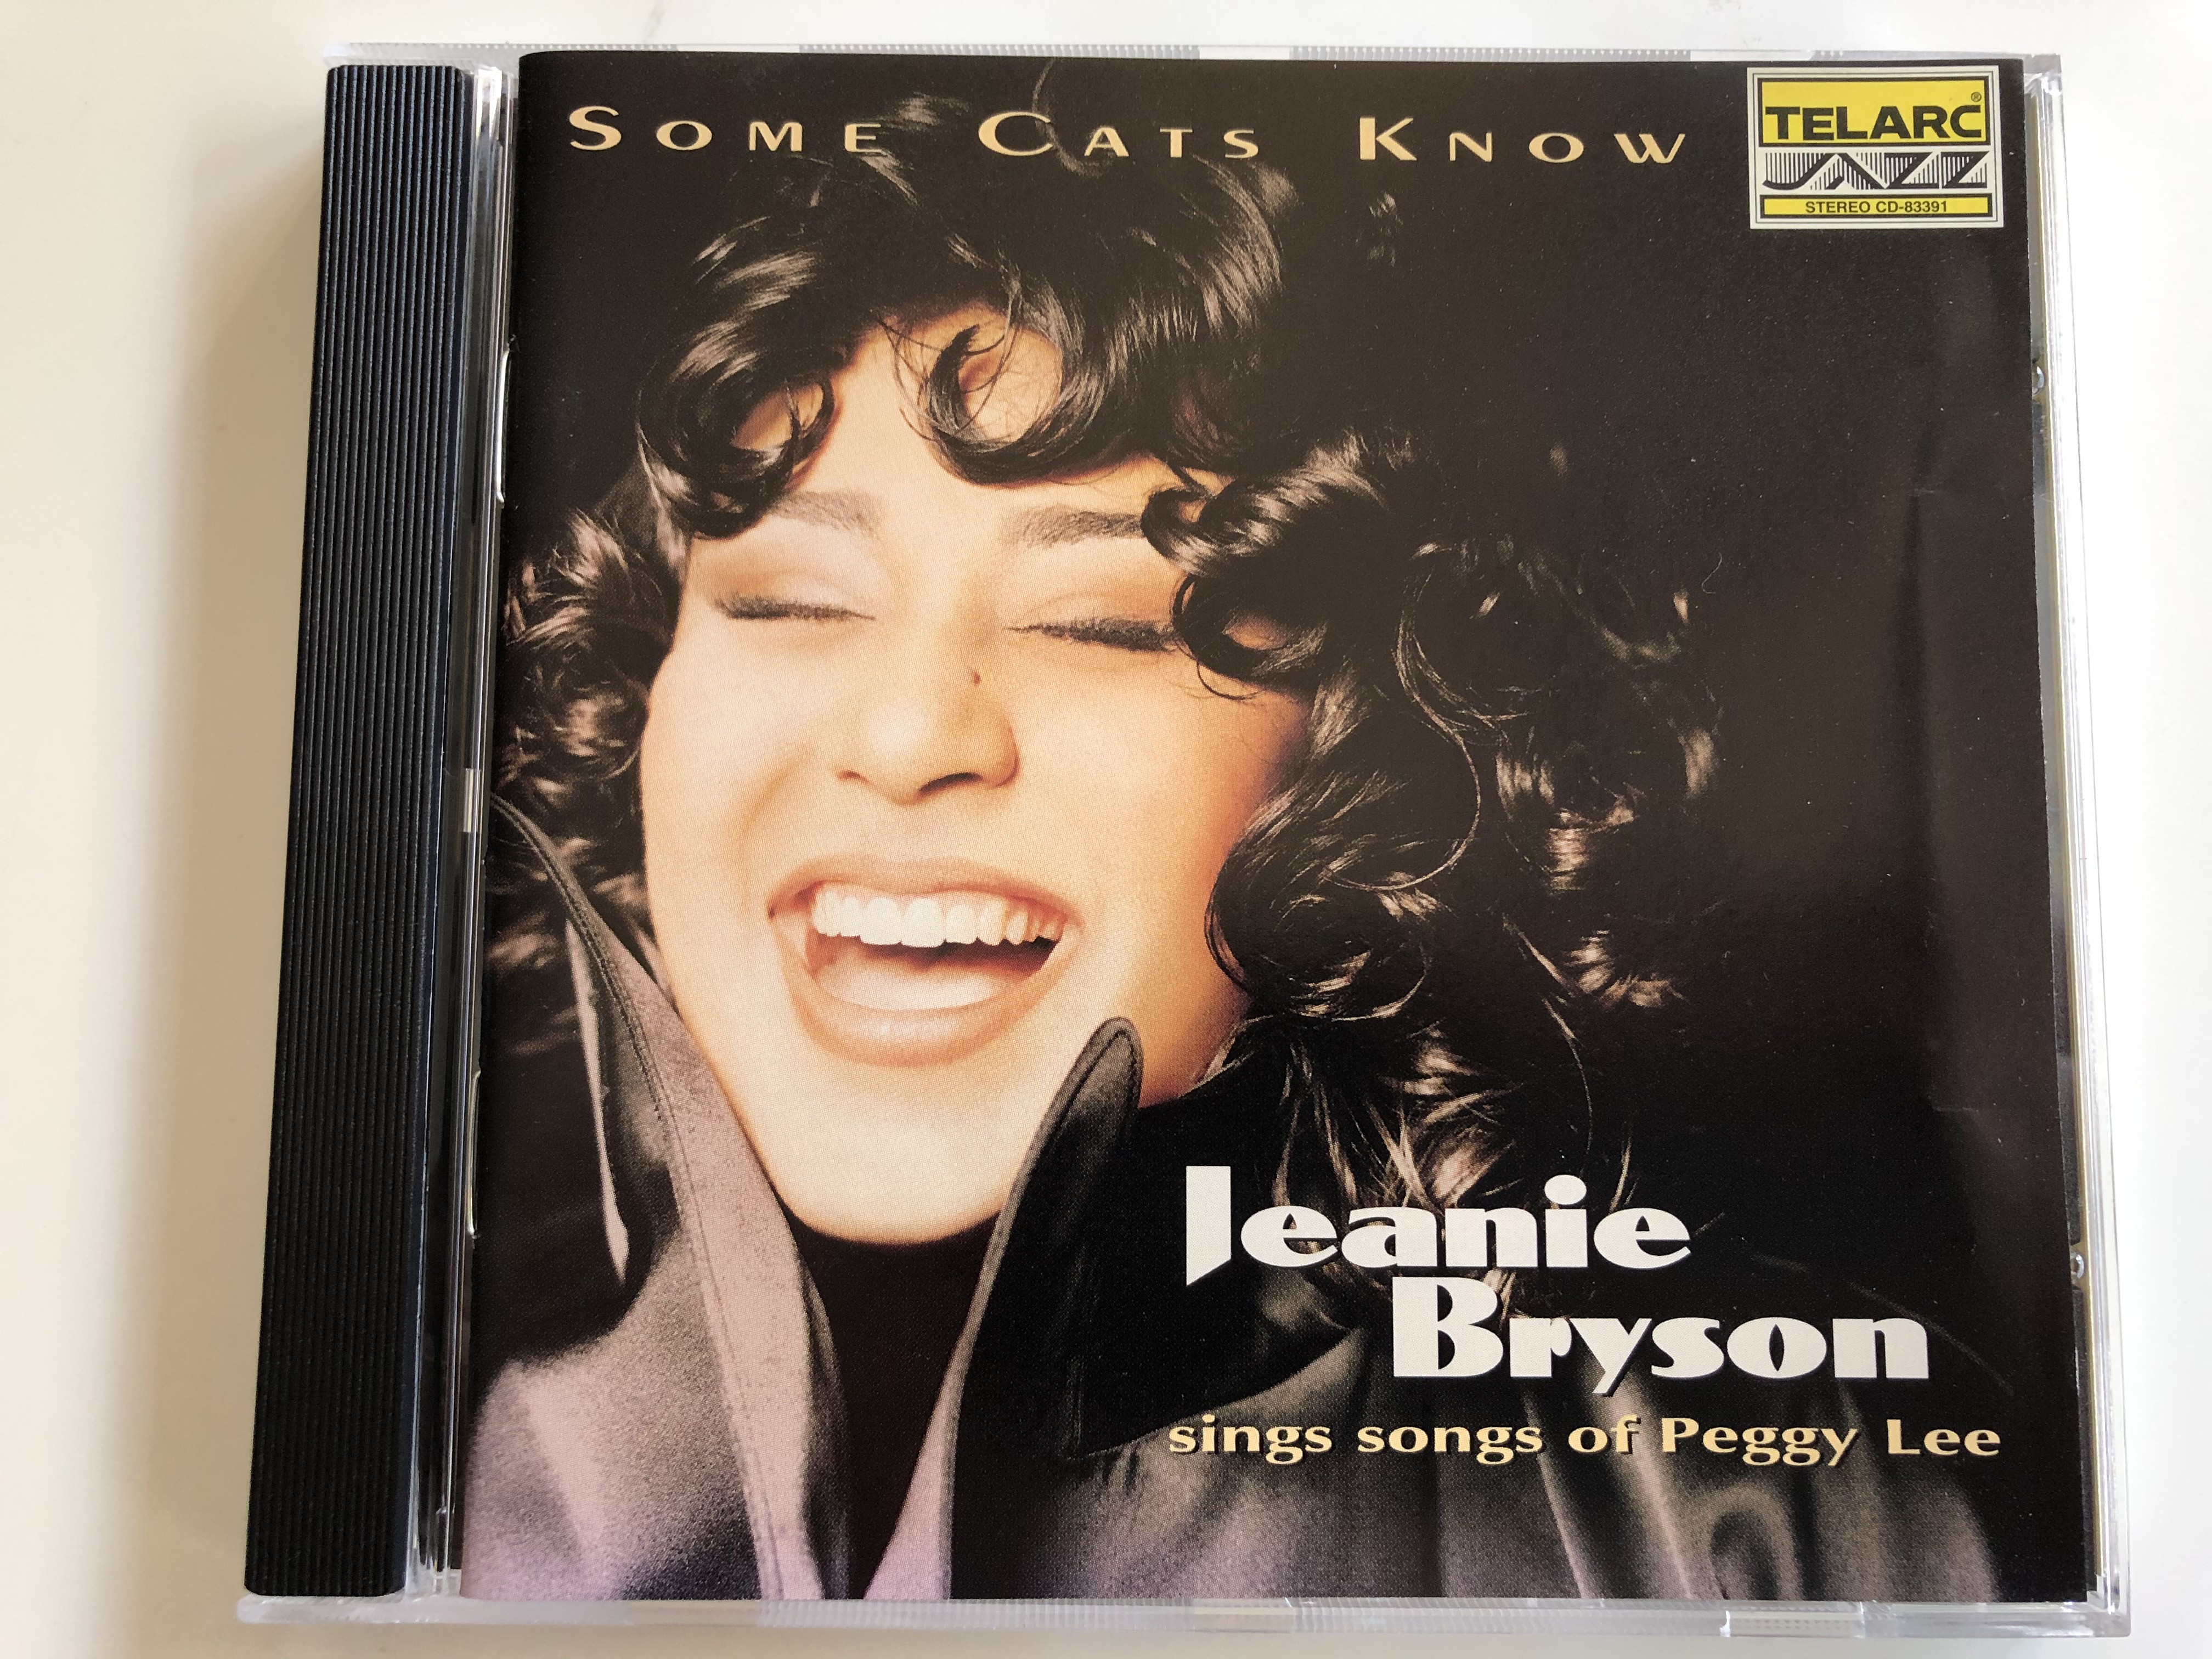 some-cats-know-jeanie-bryson-sings-songs-of-peggy-lee-telarc-jazz-audio-cd-1996-cd-83391-1-.jpg